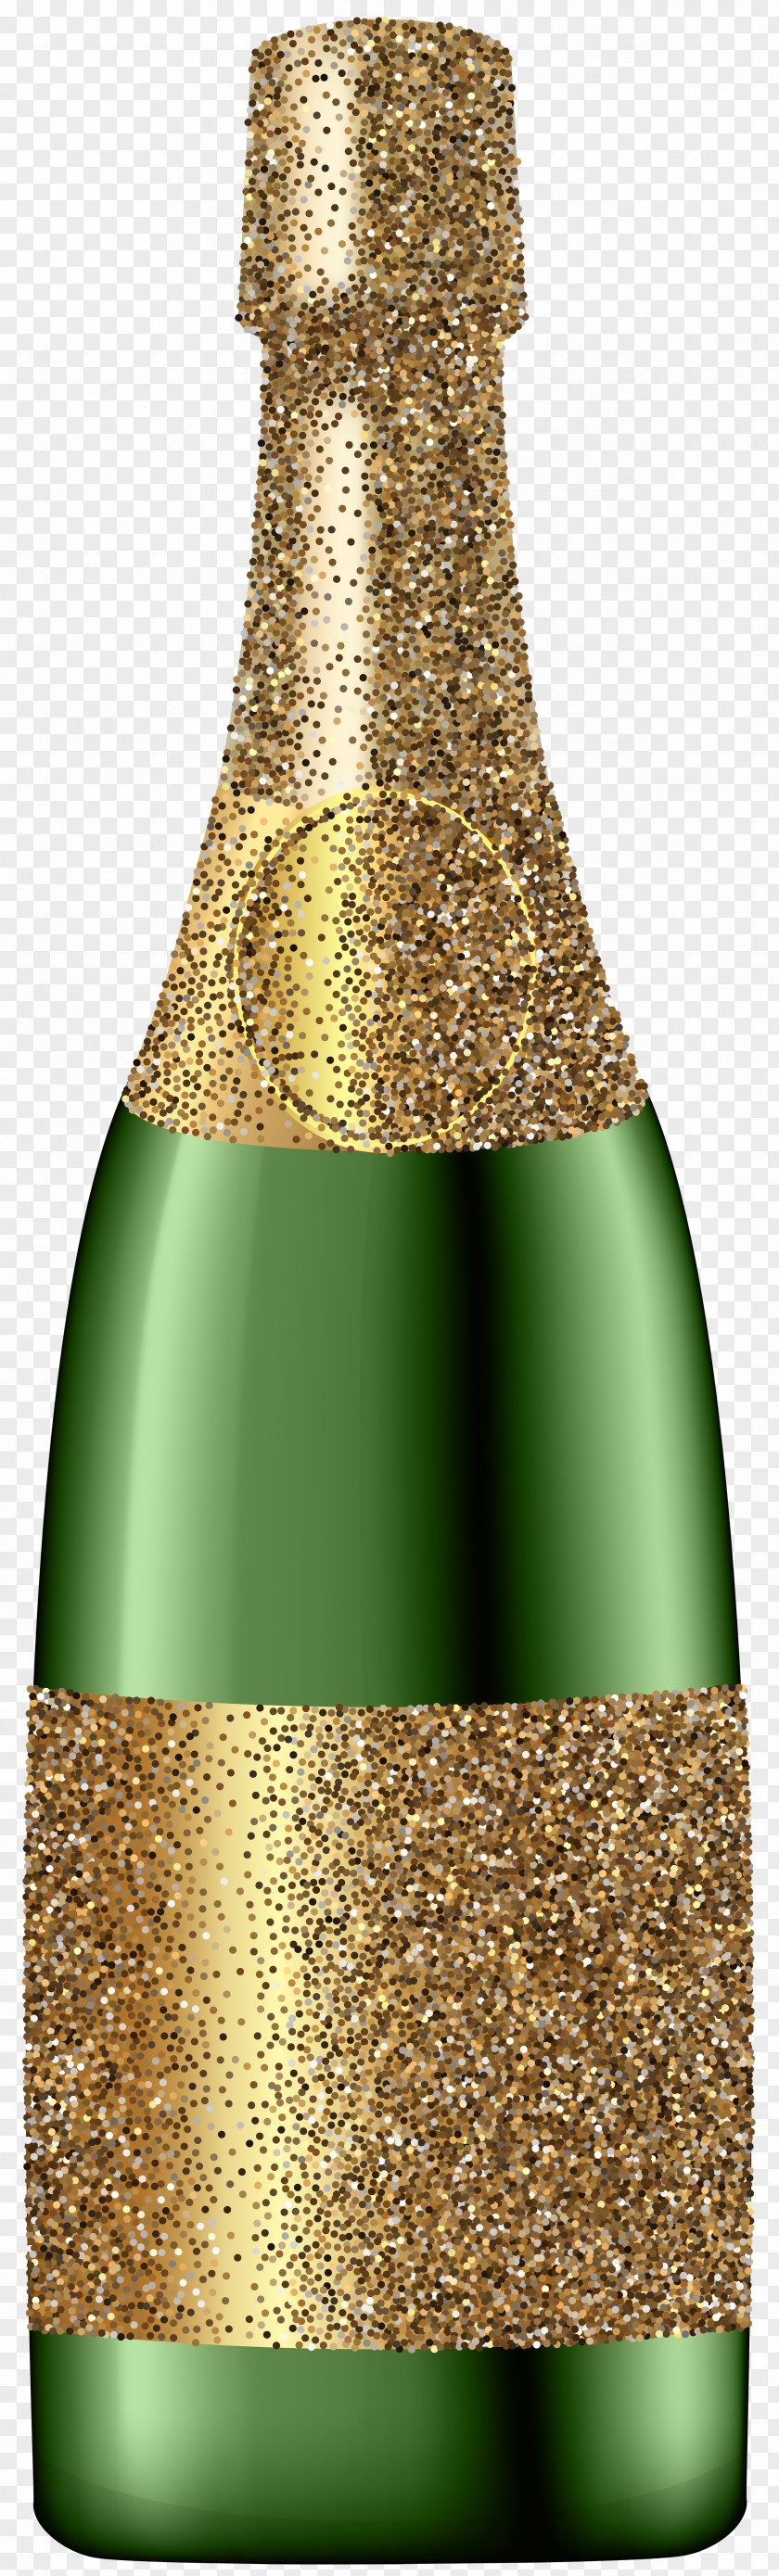 Glitter Champagne Bottle Clip Art Image Red Wine PNG